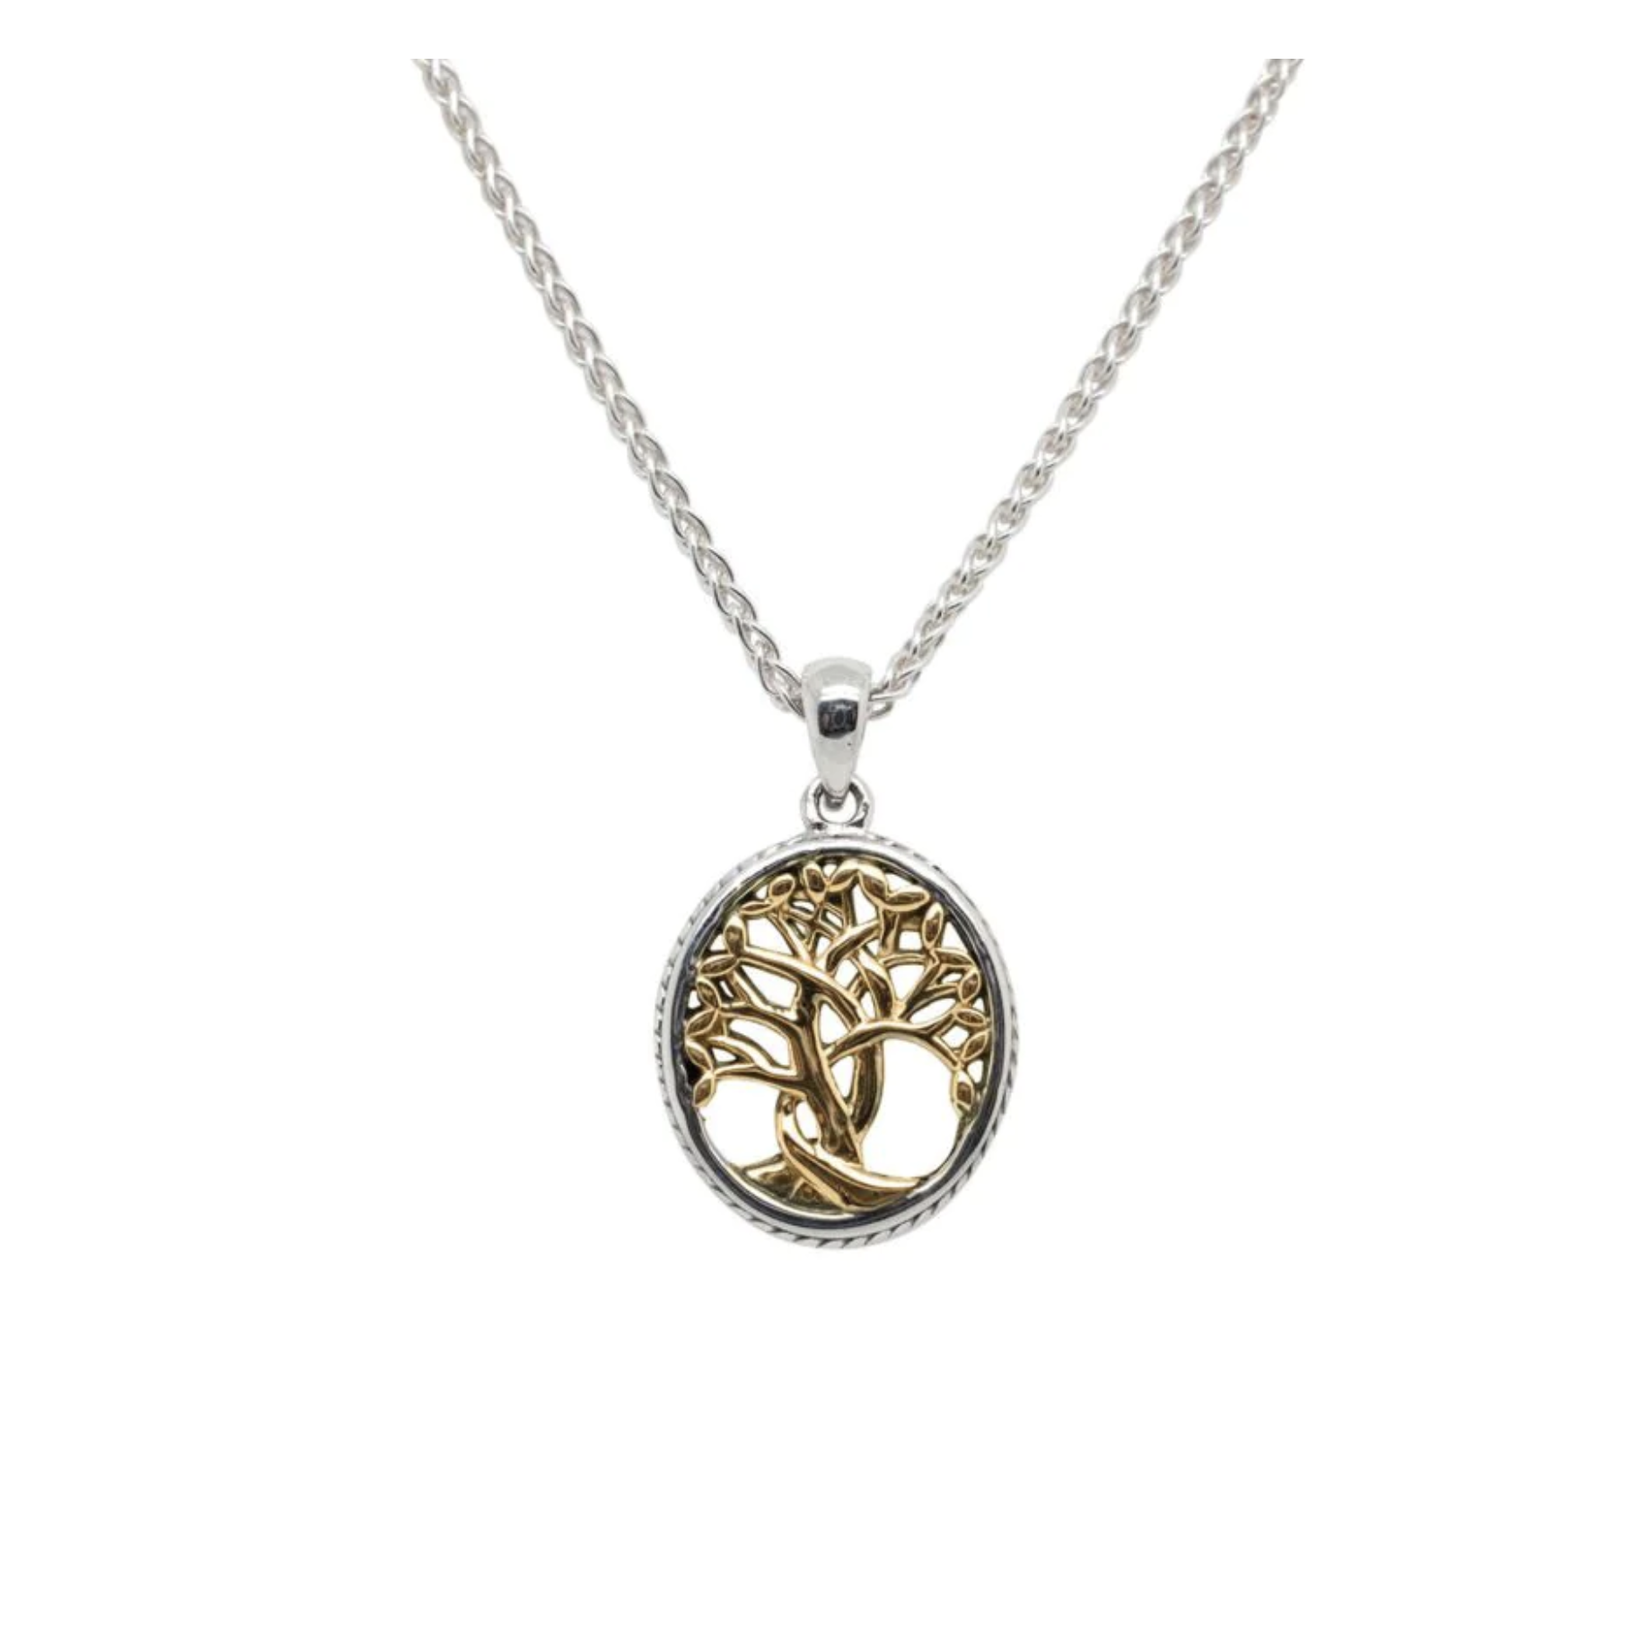 Keith Jack Silver and 10K Gold Petite Tree of Life Necklace